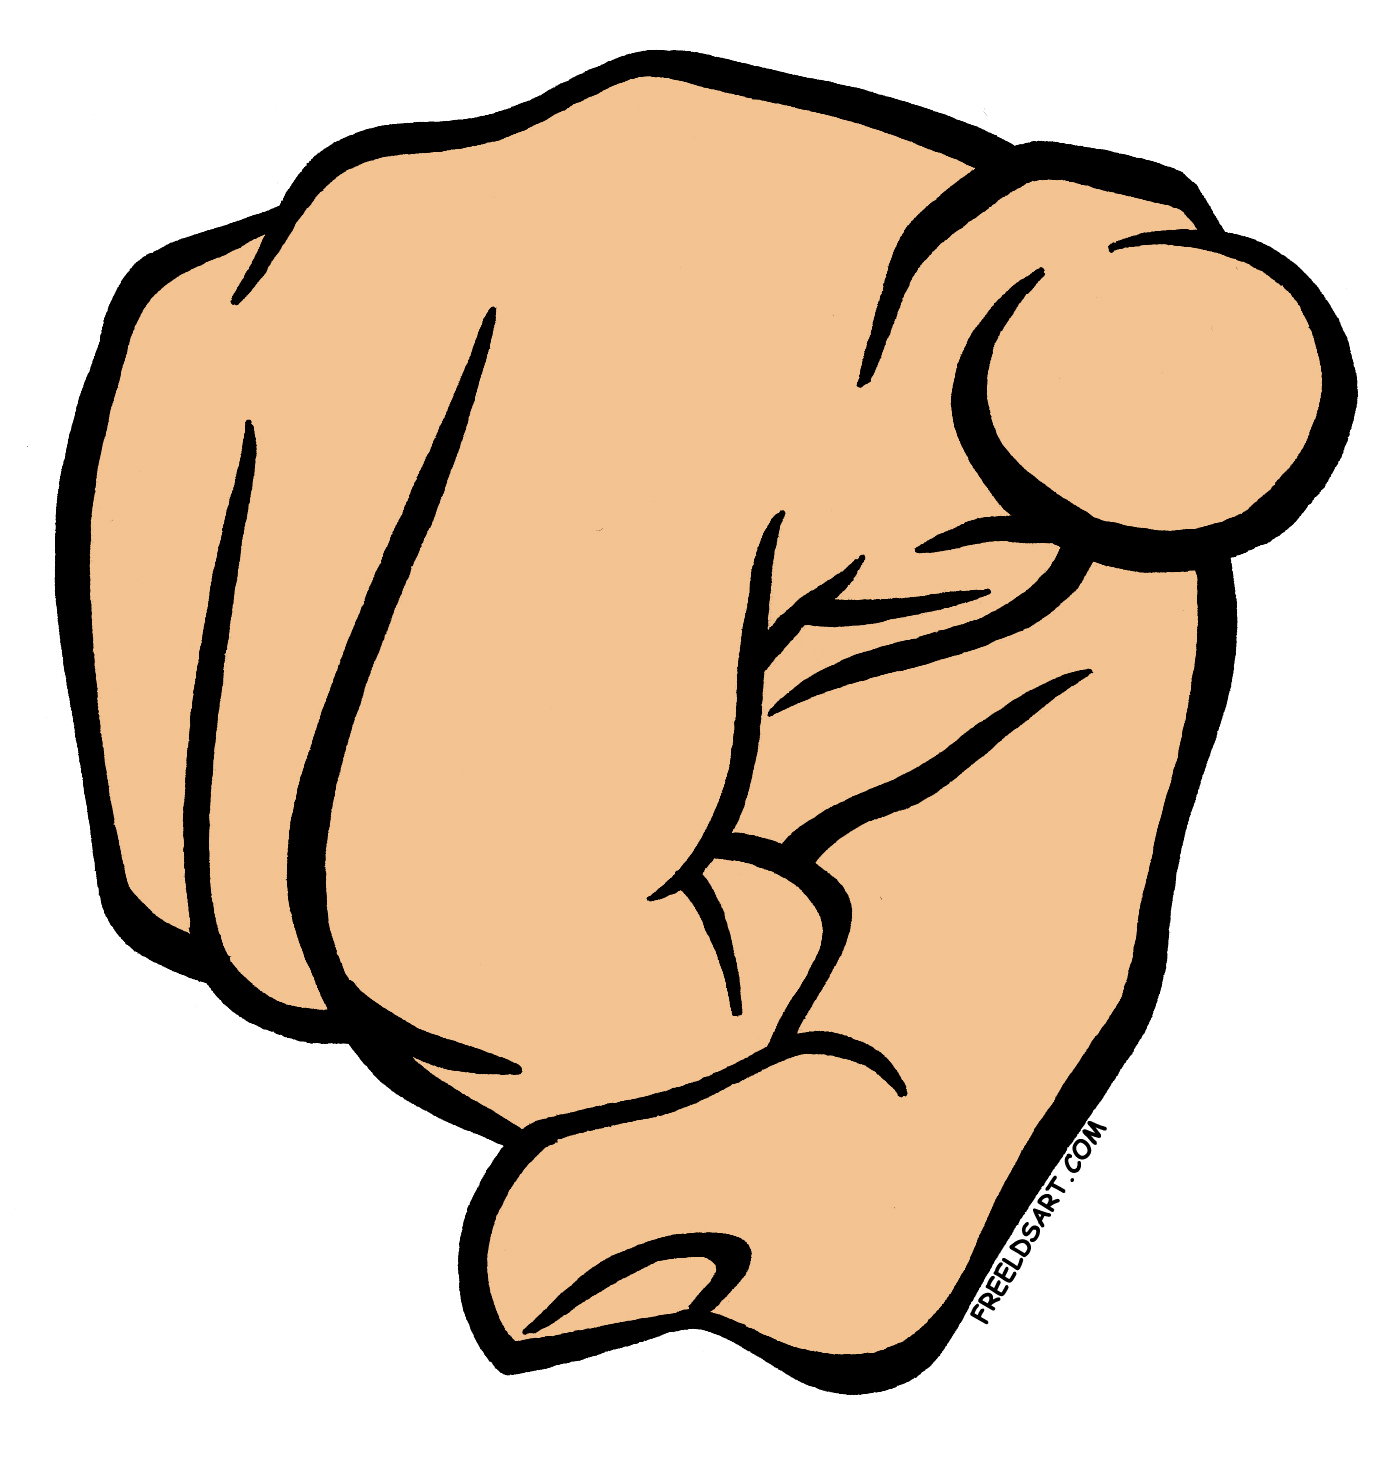 Pointing finger clipart.